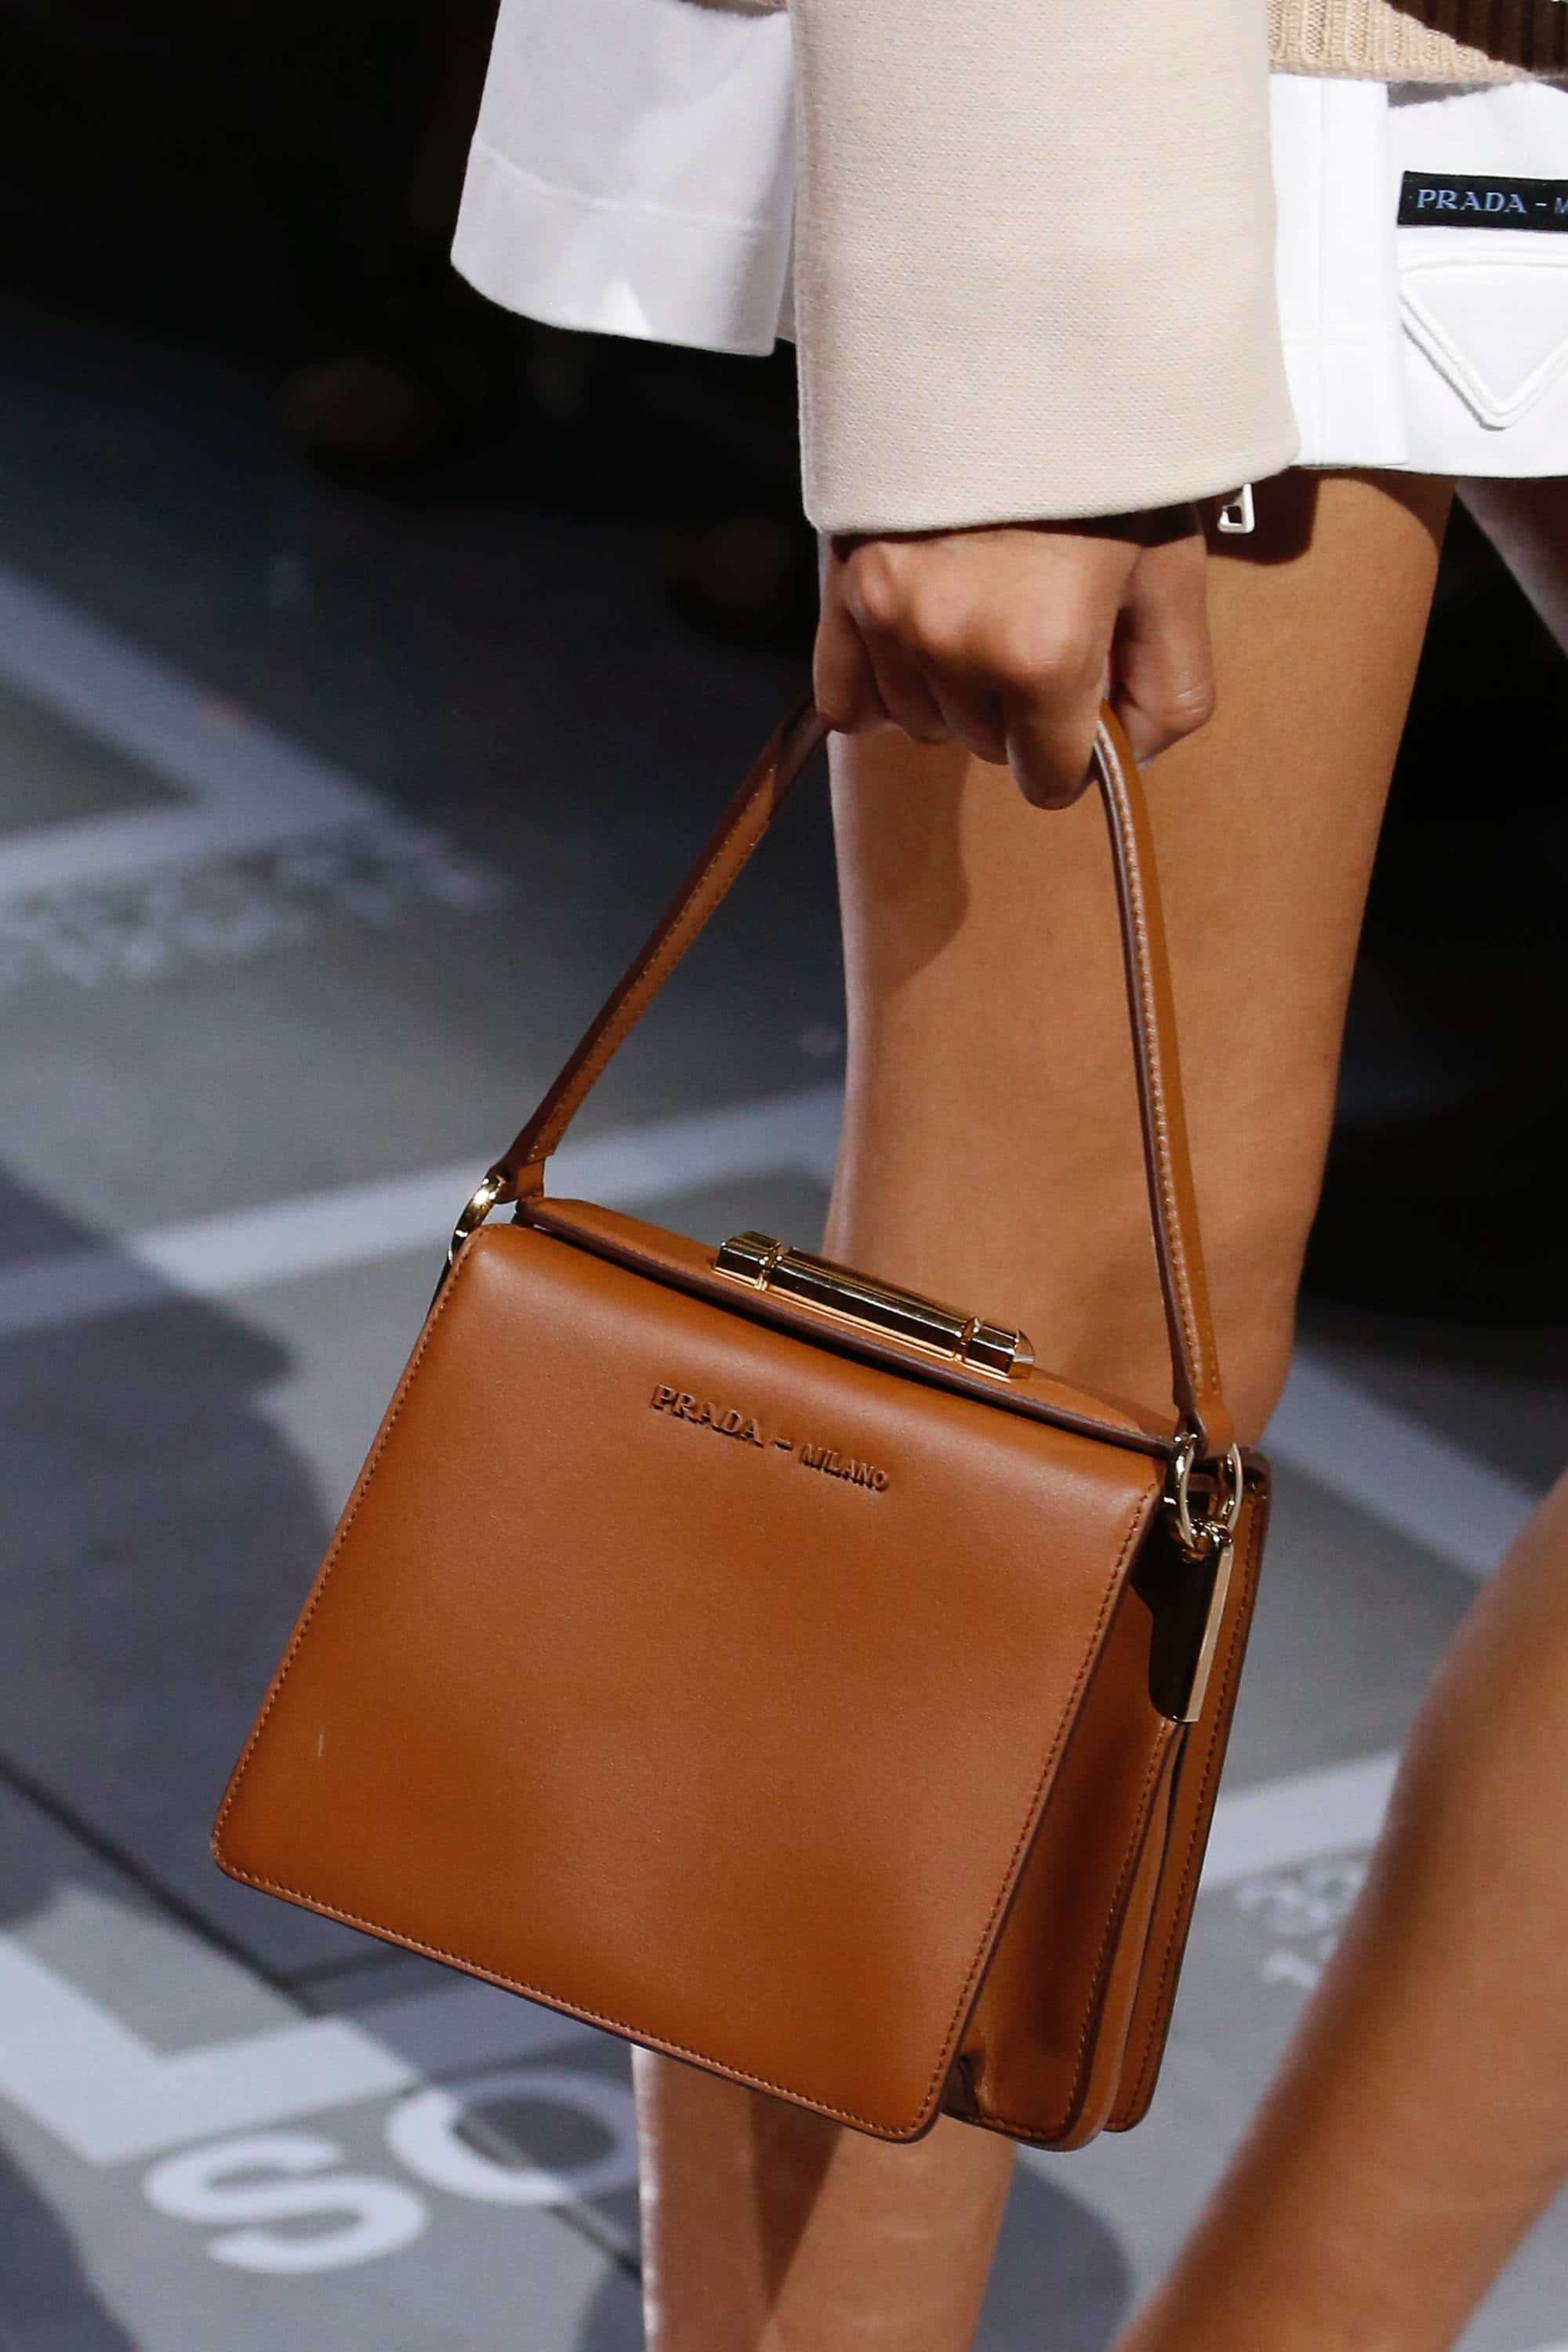 Prada Spring/Summer 2019 Runway Bag Collection | Spotted Fashion